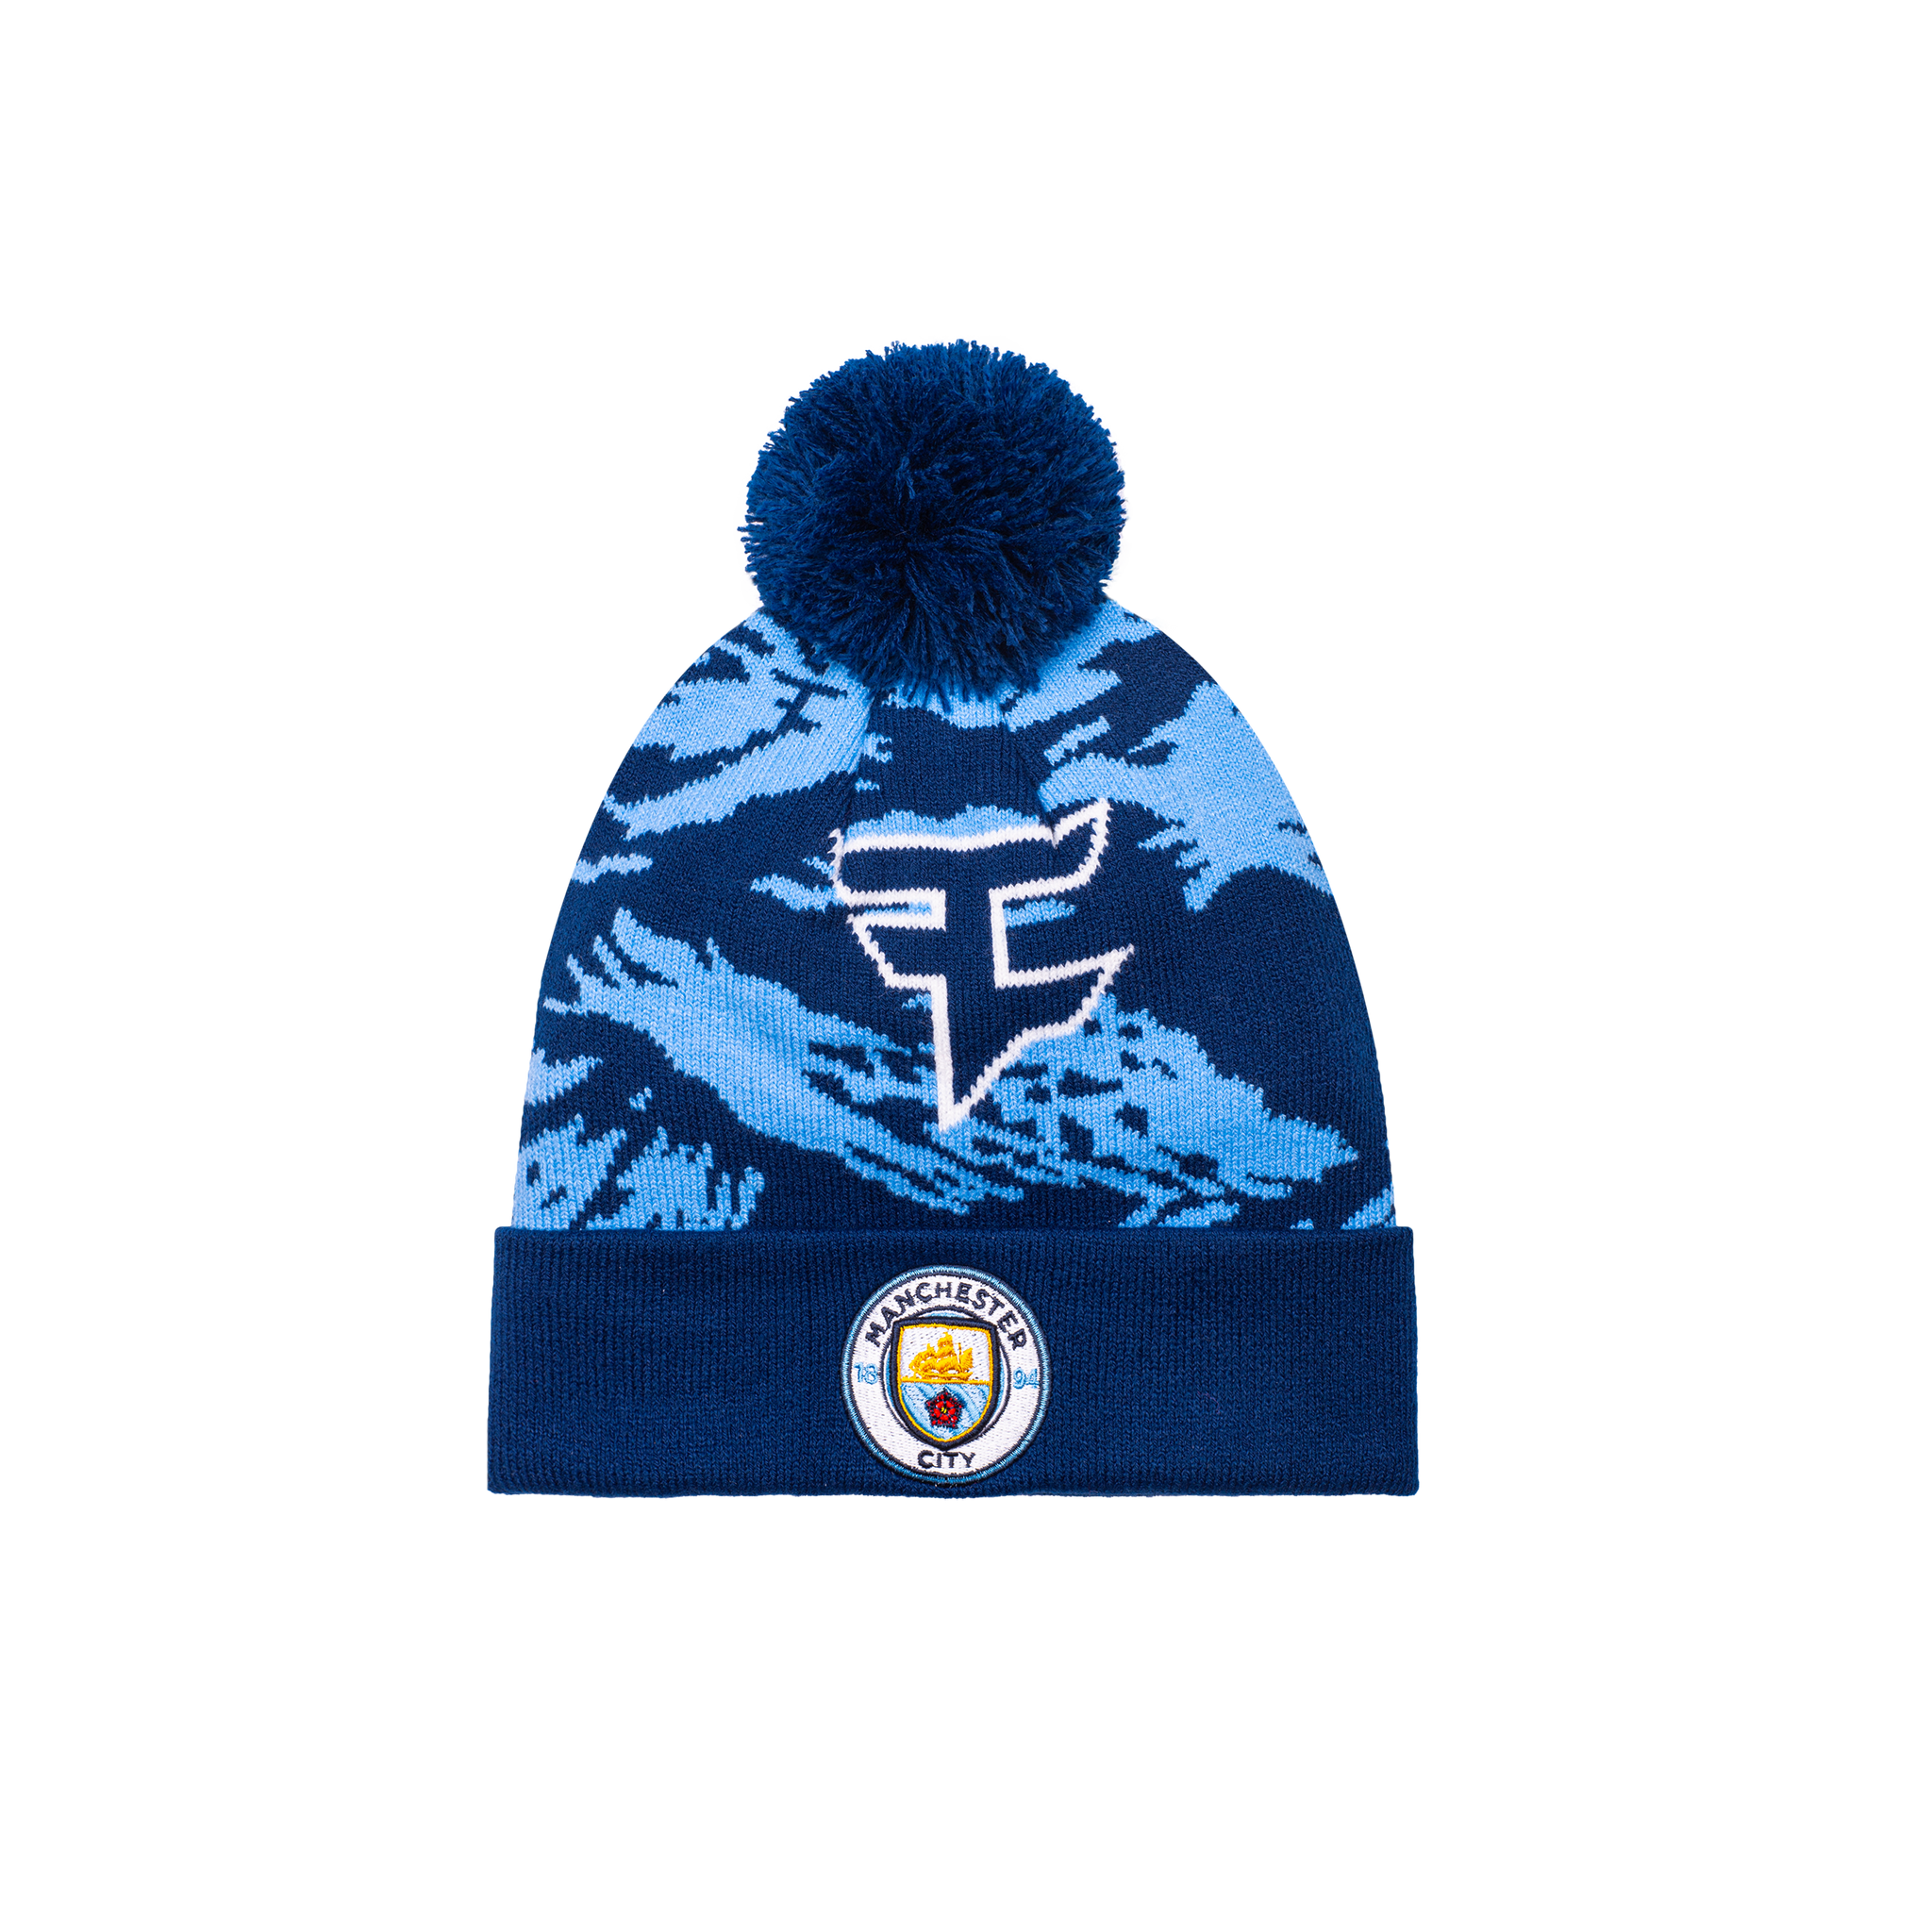 Manchester City Faze clan Collaboration Camo Knit Beanie with a Blue Beanie and a Manchester City Logo on the front